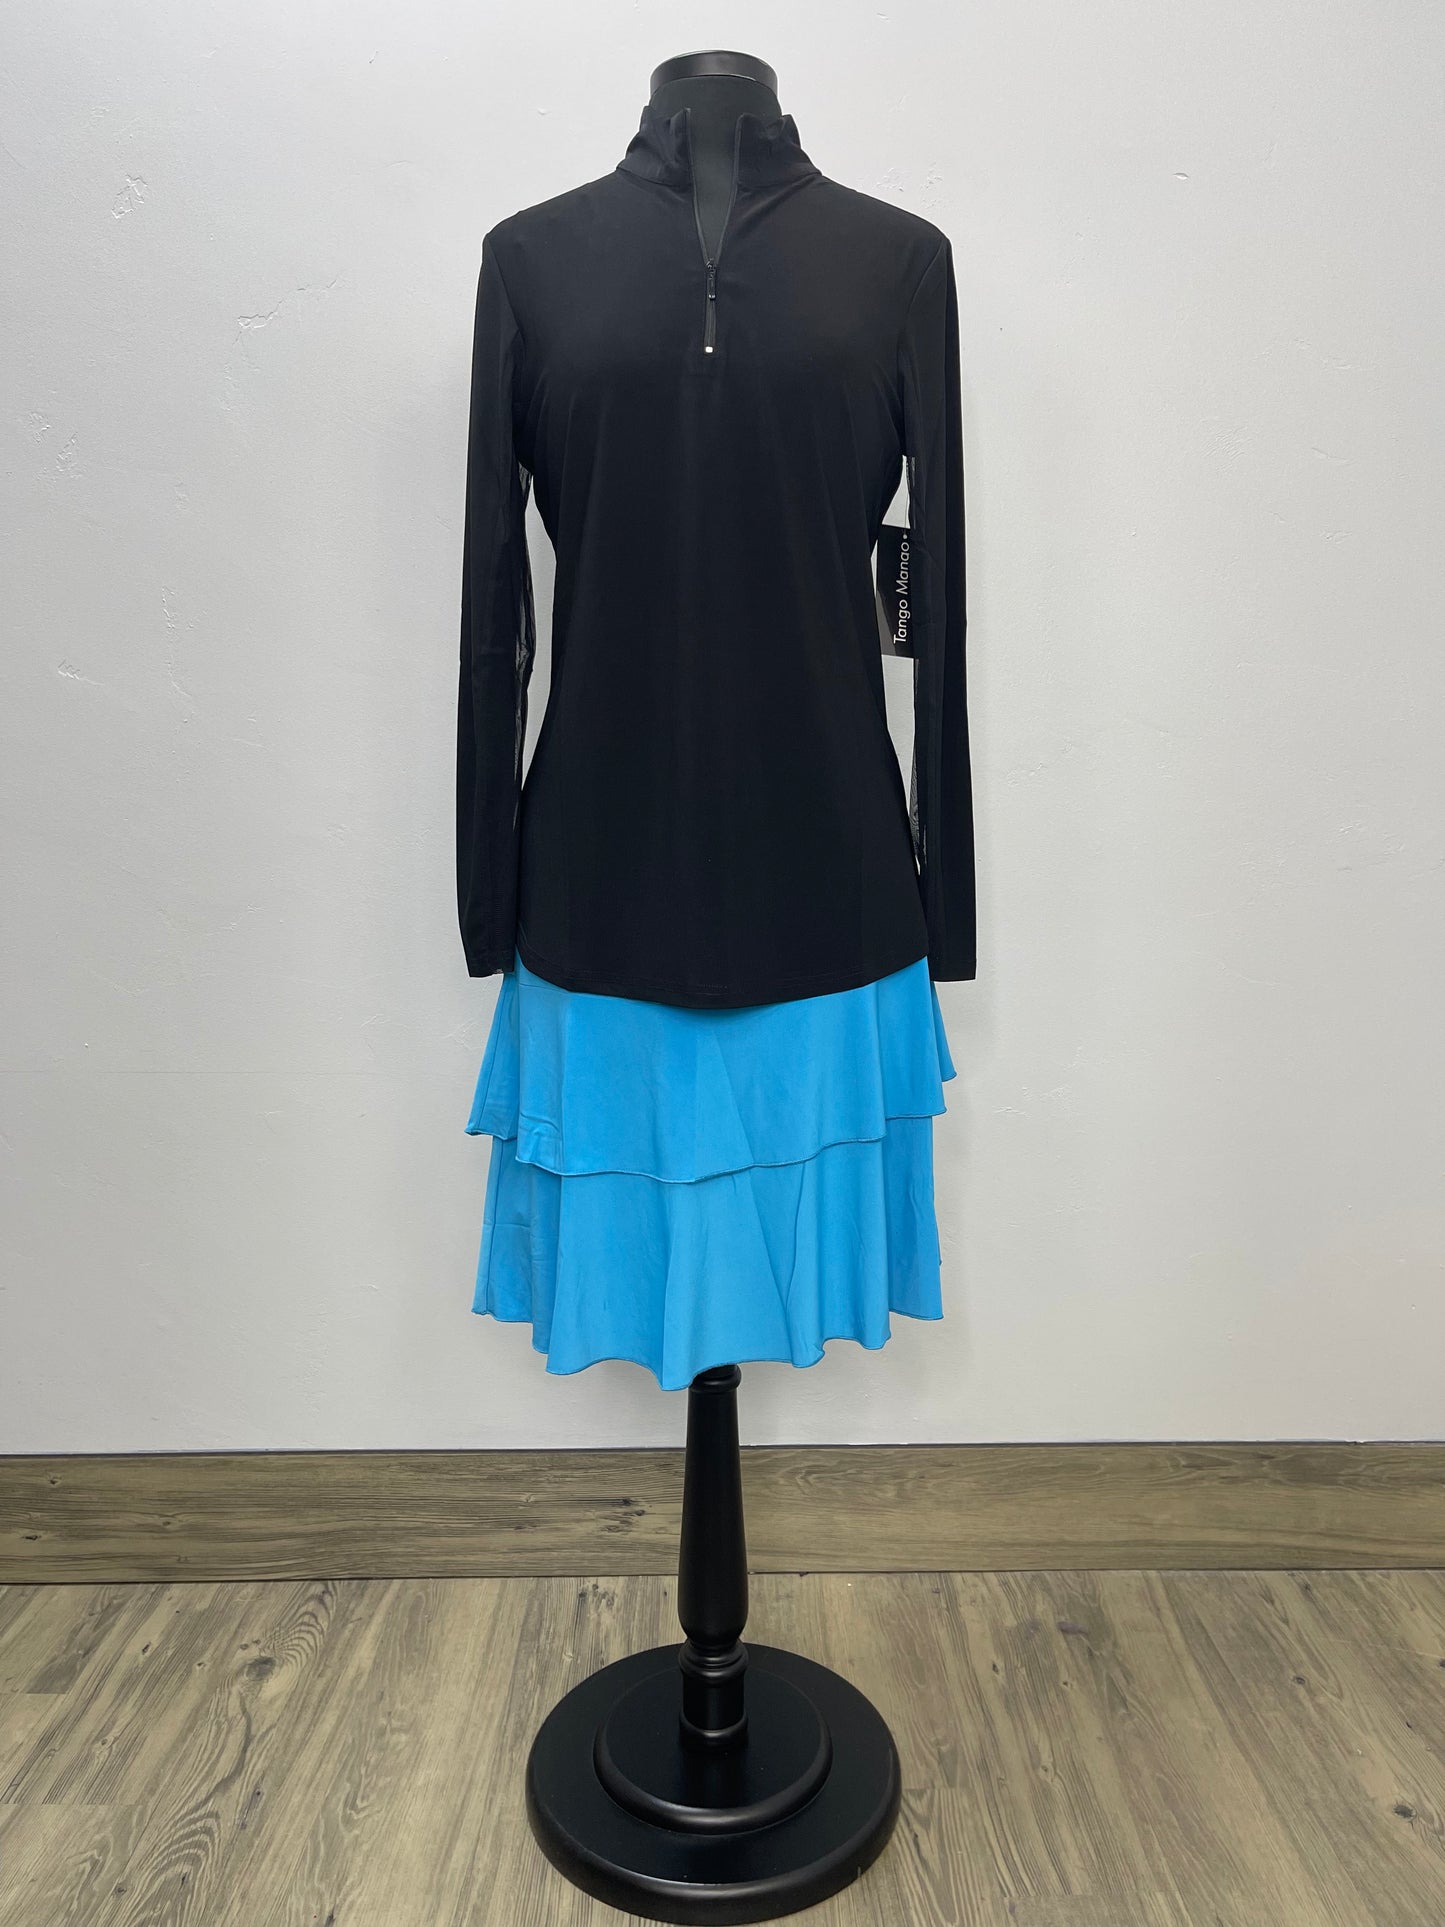 Black Long Sleeve Top with Zippered Collar